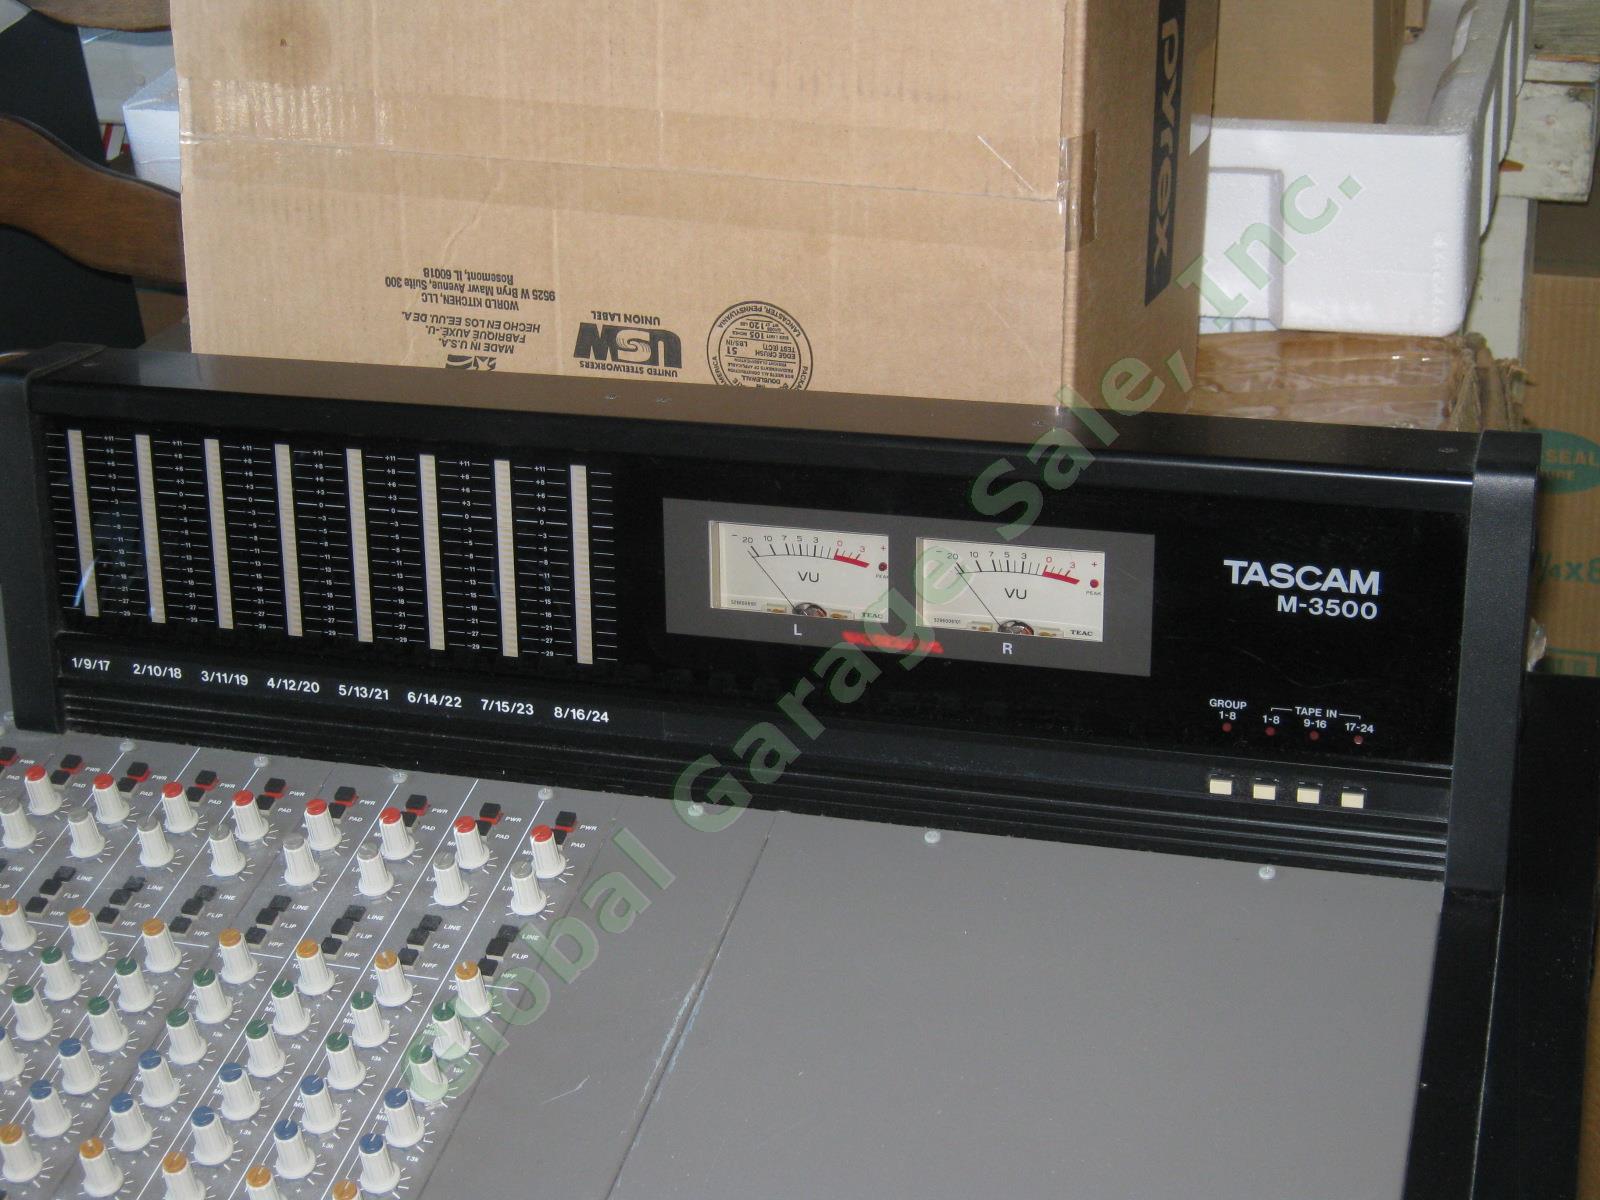 Tascam M-3500 24-Track Analog Radio Station Mixer Mixing Board 4 Pickup/Delivery 3